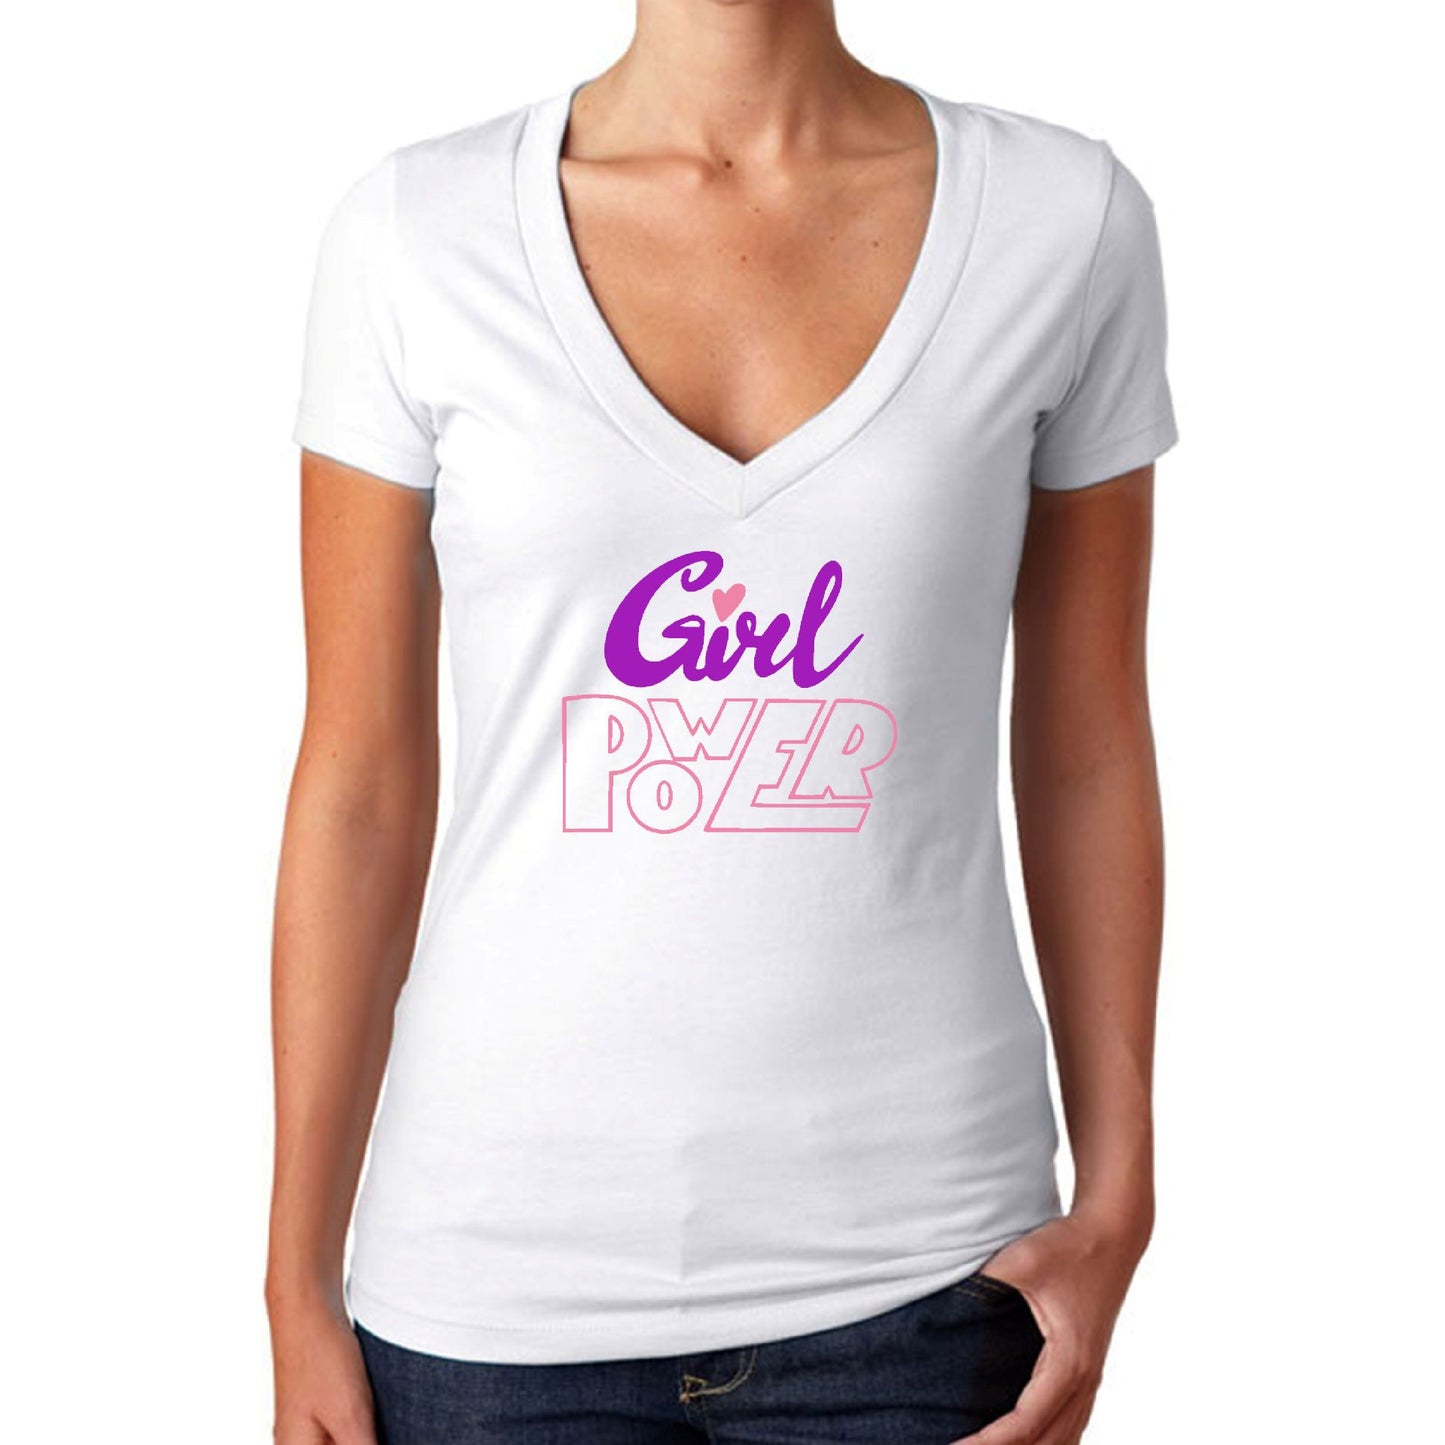 Girl Power Self Expression T-Shirt